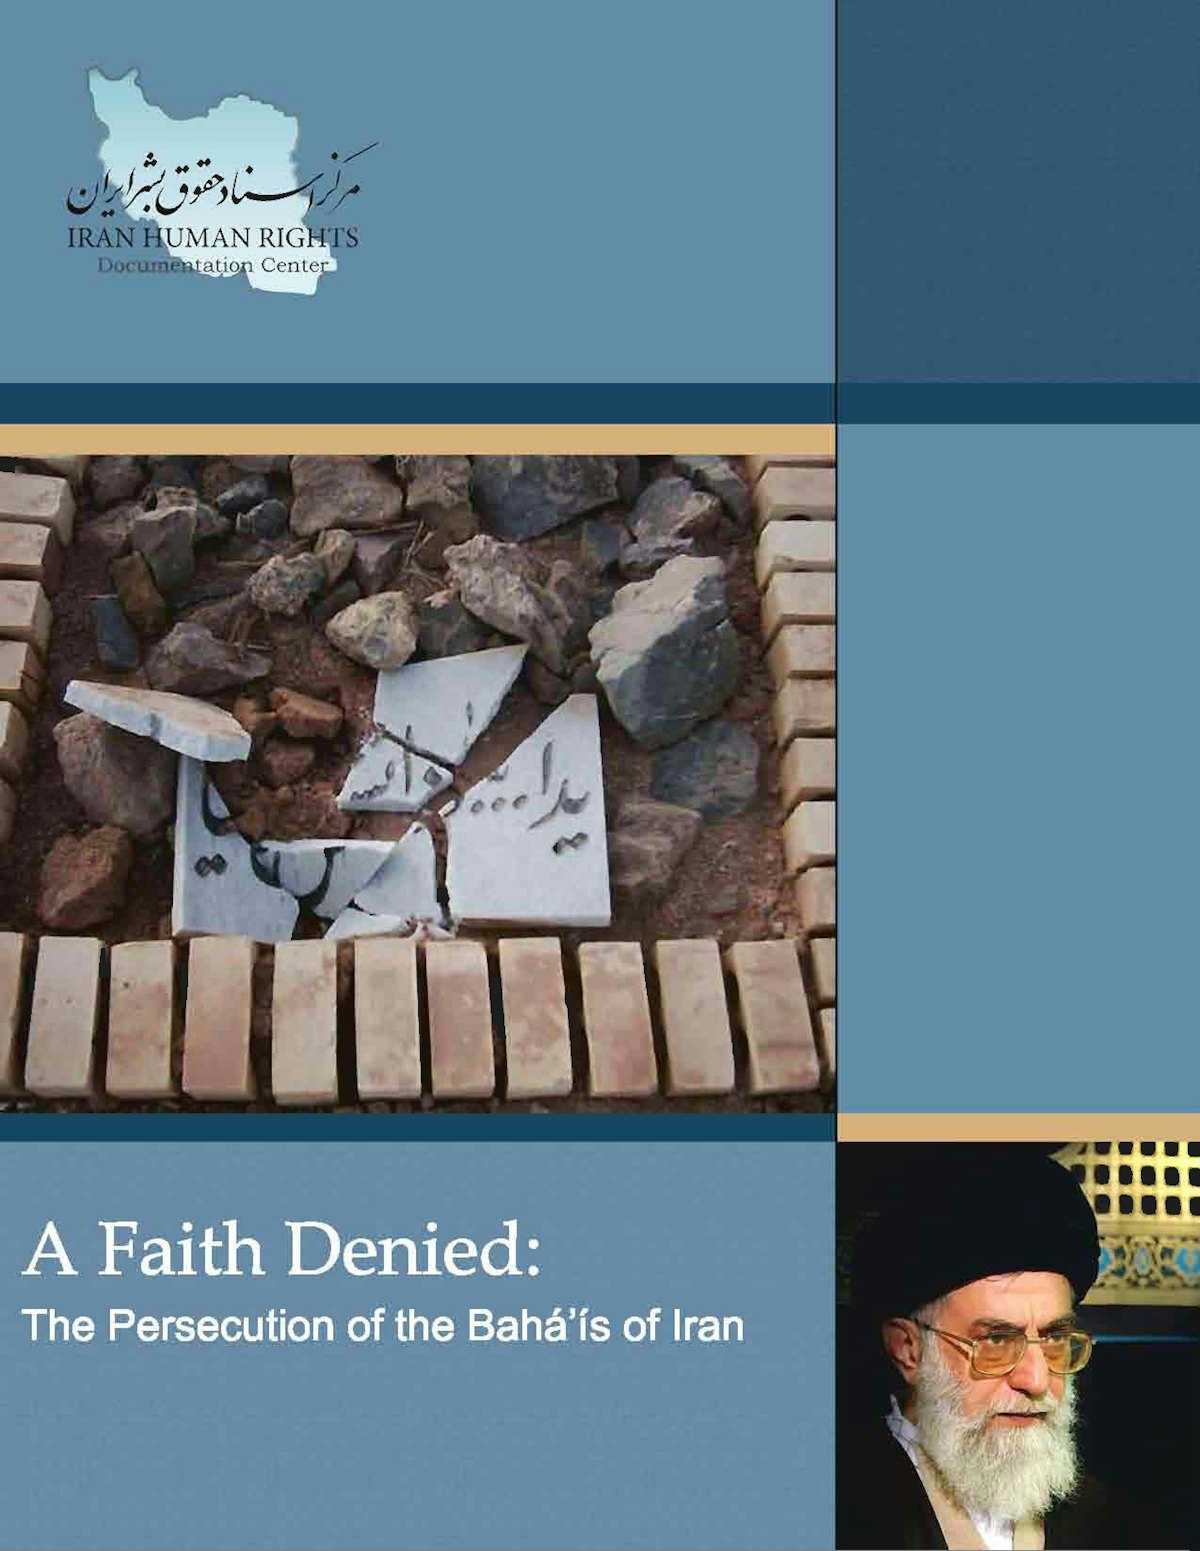 "A Faith Denied: The Persecution of the Baha'i of Iran" is a new report by the Iran Human Rights Documentation Center. The report expresses concern that Iranian Baha'is "may soon face another cycle of repression and violence."